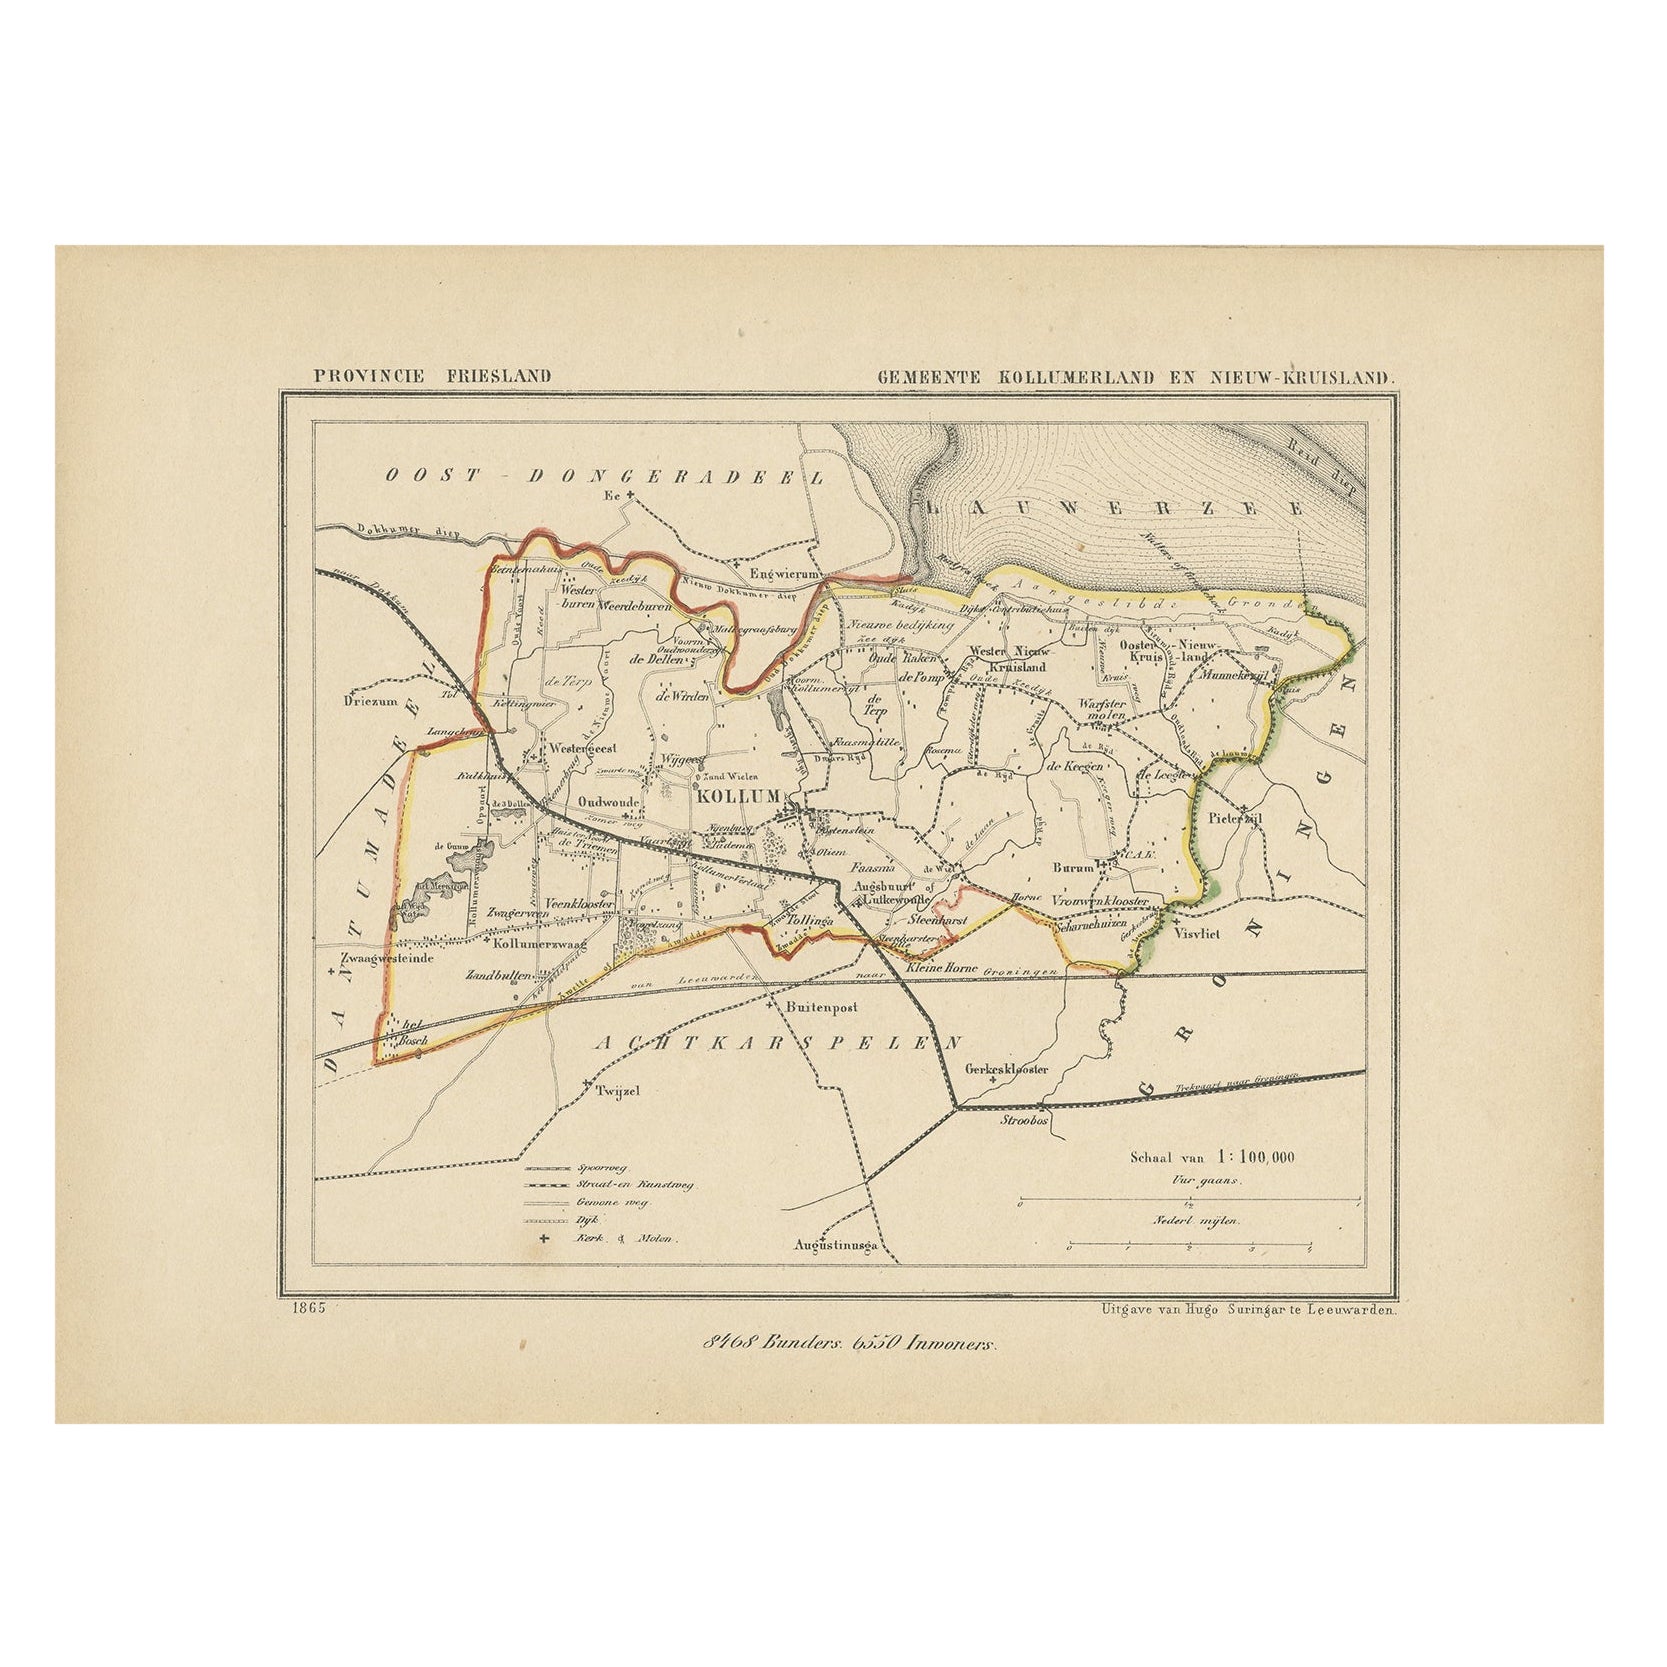 Antique Map of Kollumerland in Friesland, The Netherlands, 1868 For Sale